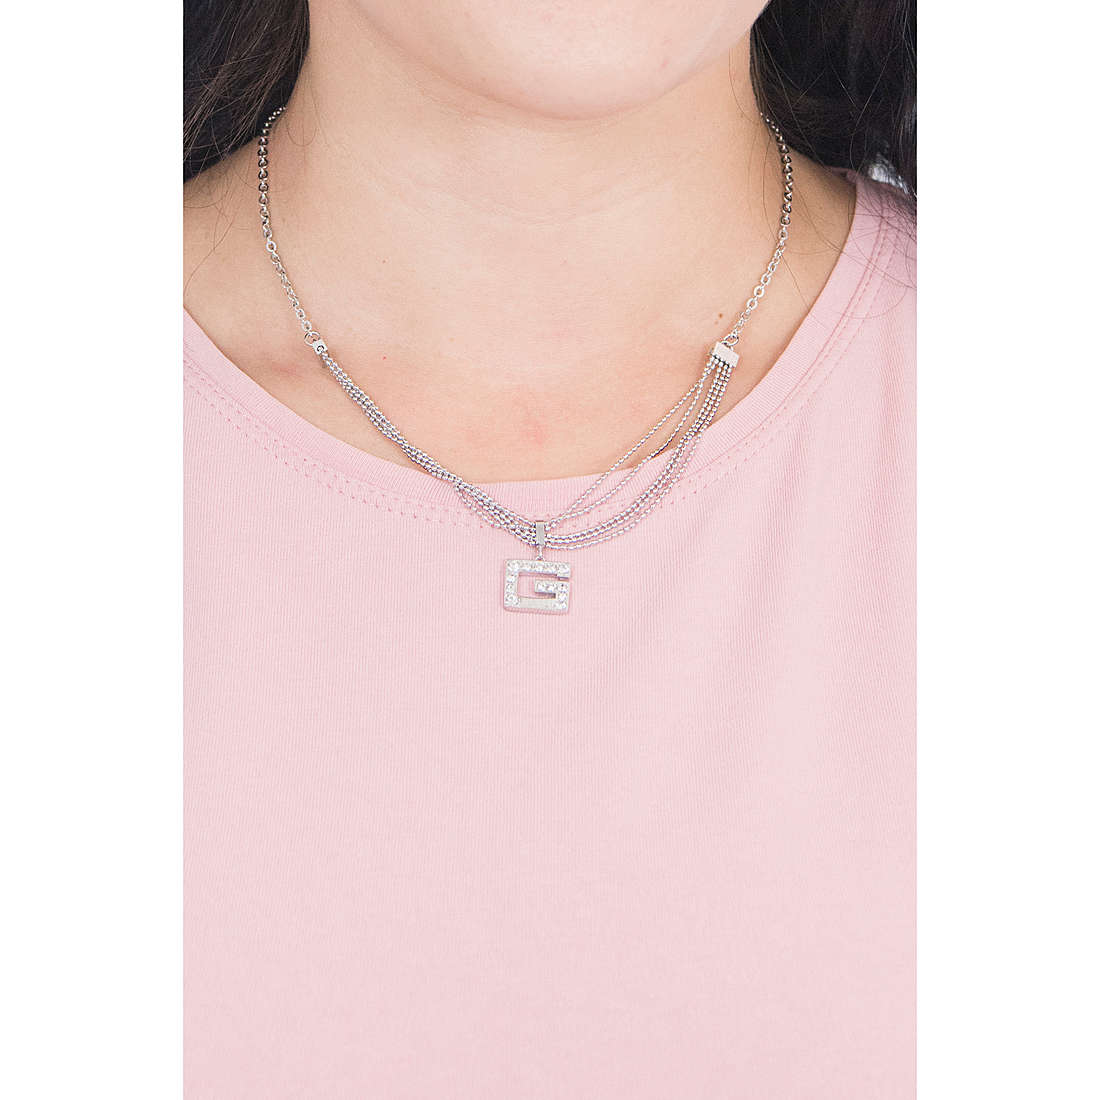 Guess necklaces woman UBN79056 wearing